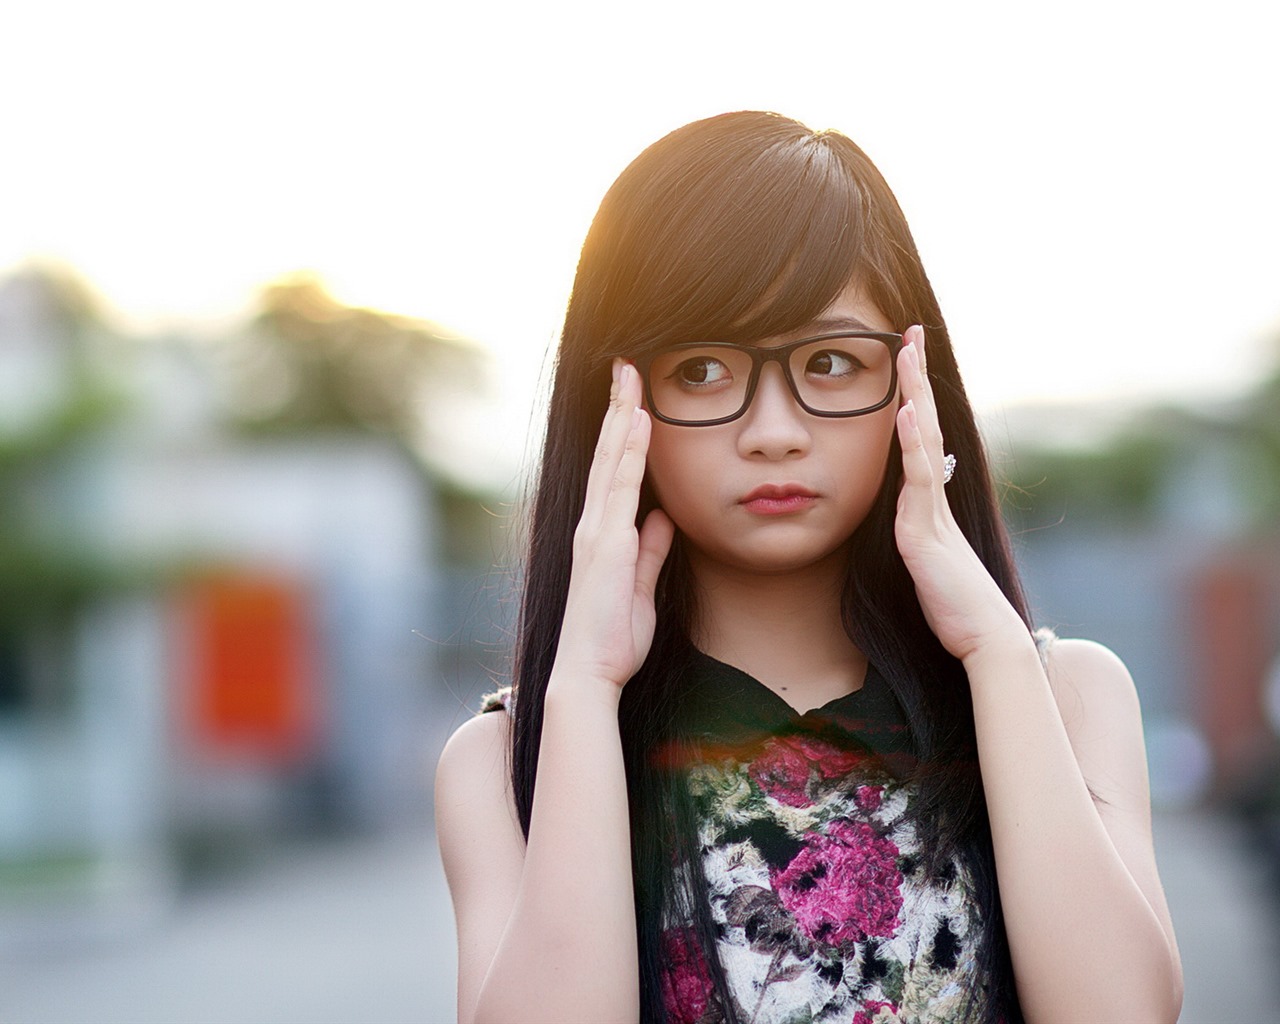 Pure and lovely young Asian girl HD wallpapers collection (3) #34 - 1280x1024